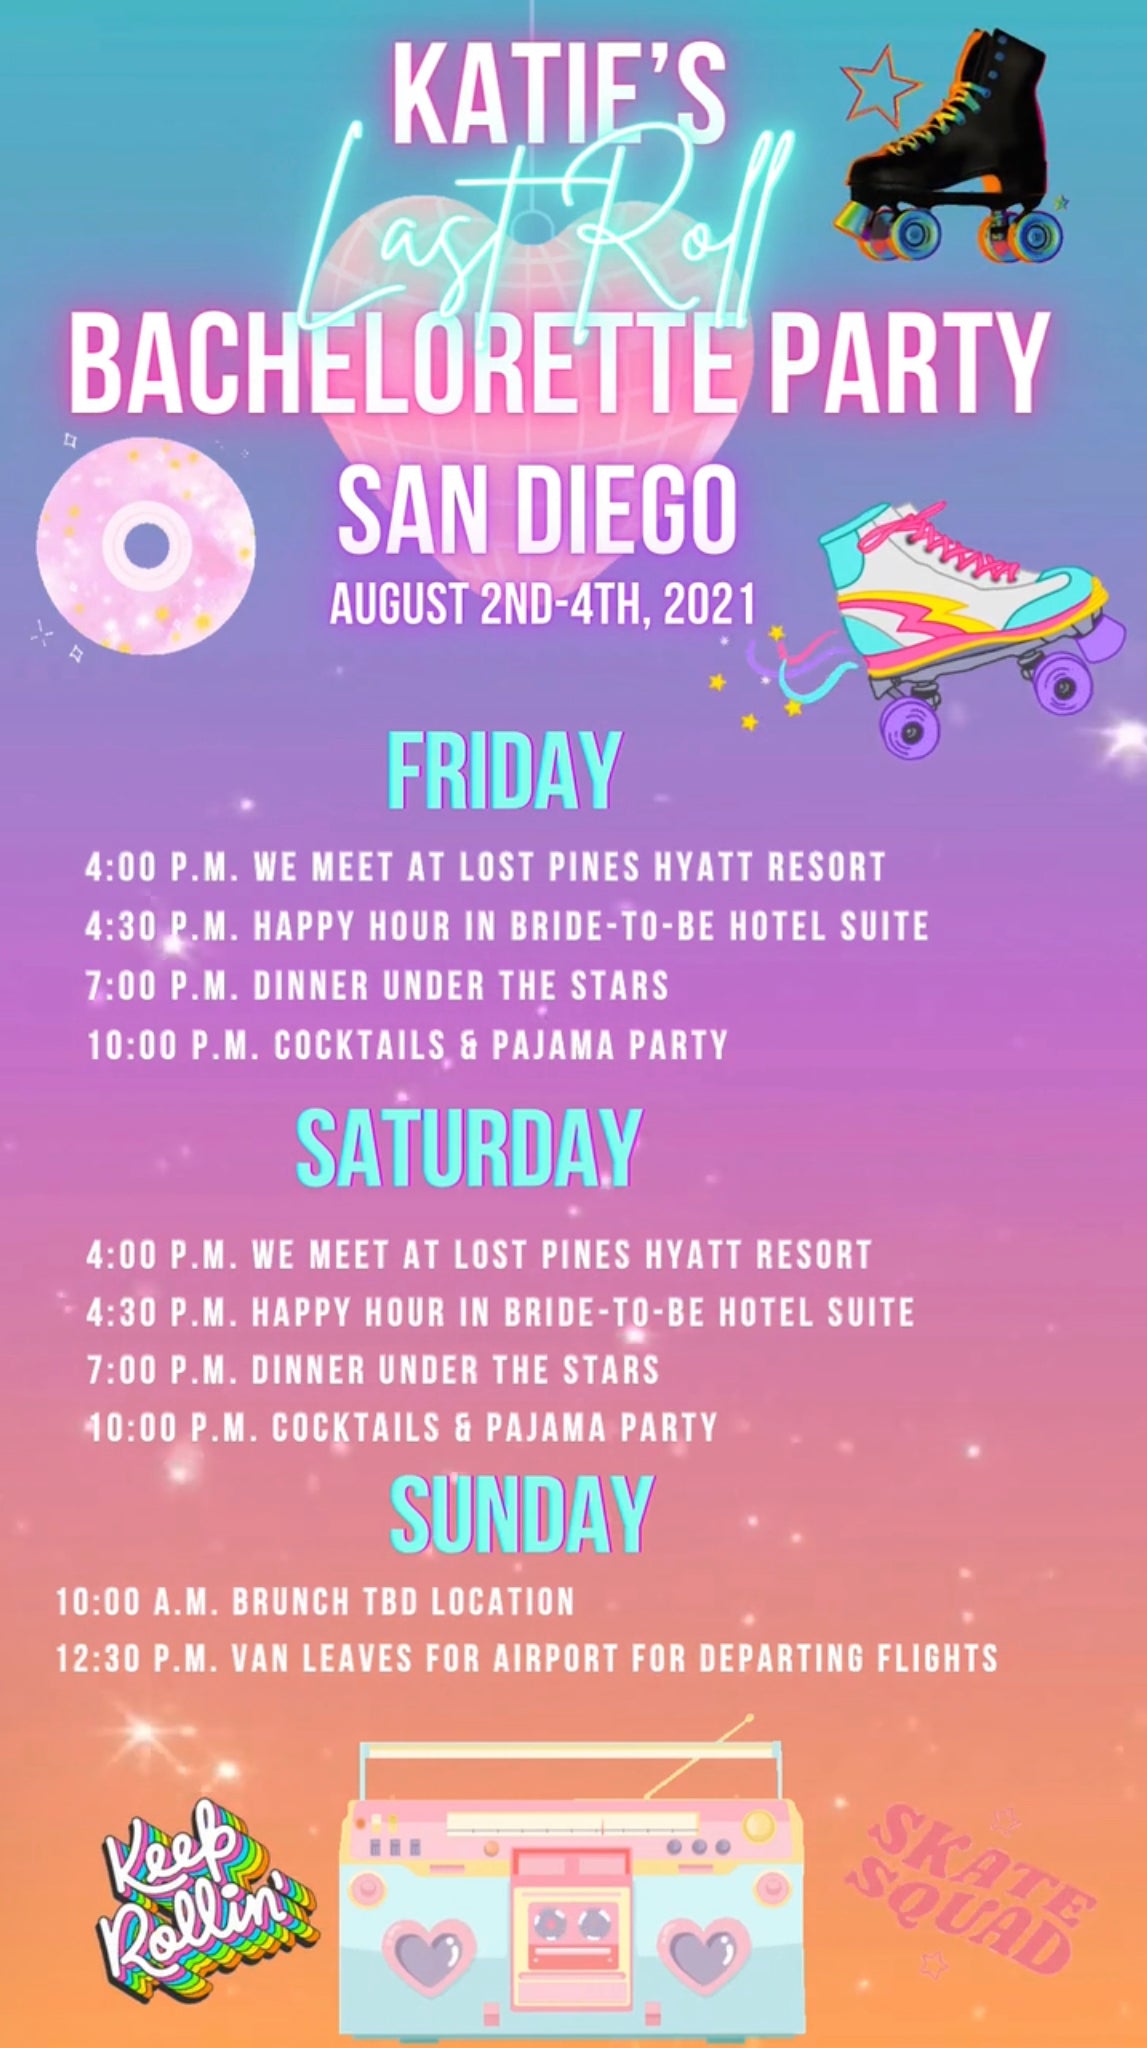 Let’s Roll Video Itinerary, Roller Skates Party Itinerary